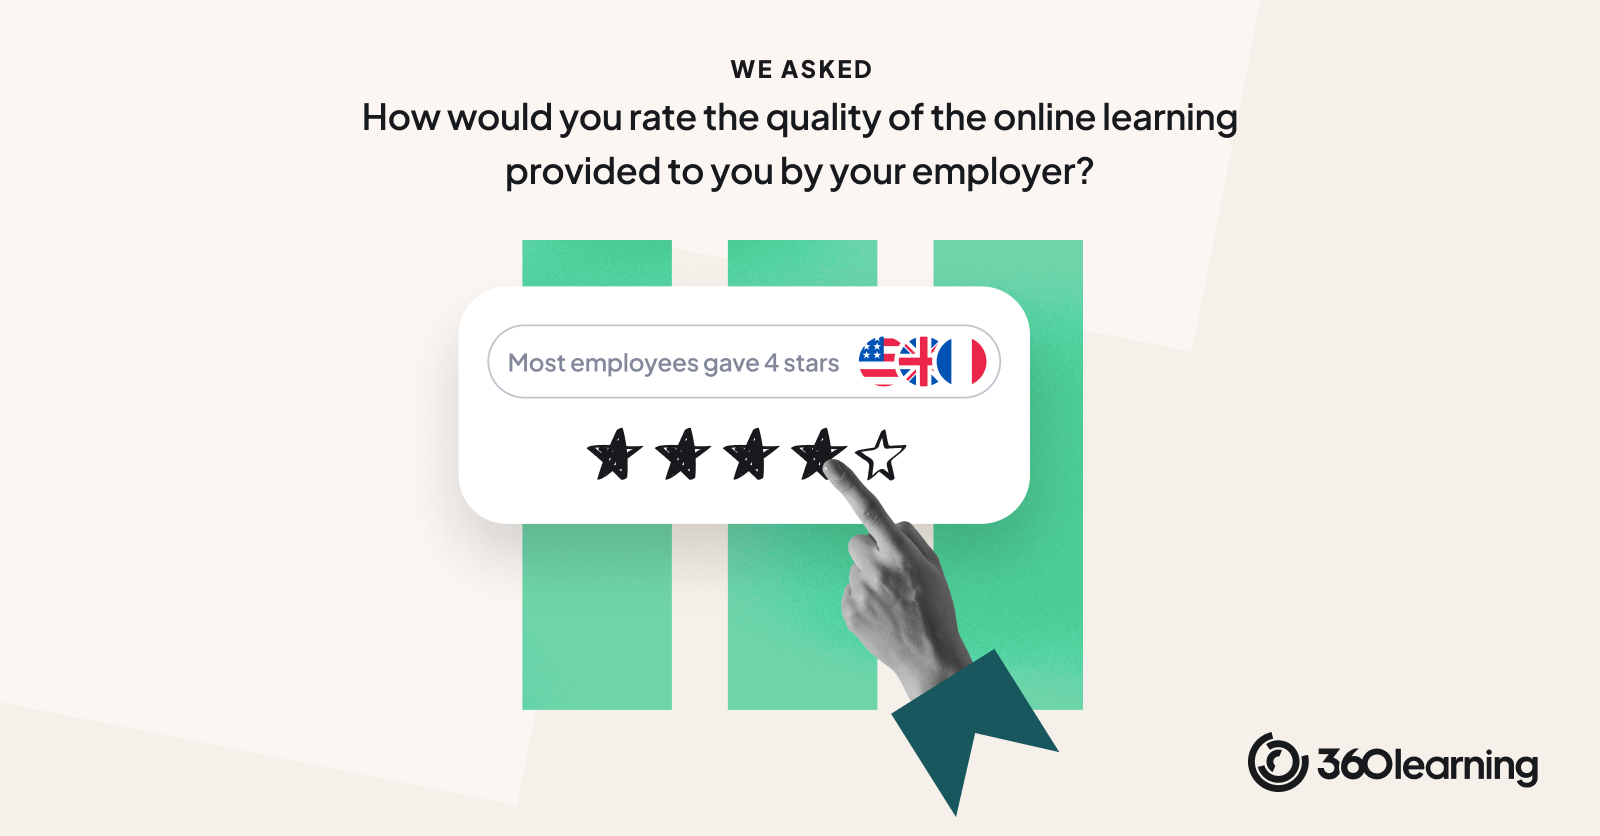 Employees rate their online learning highly